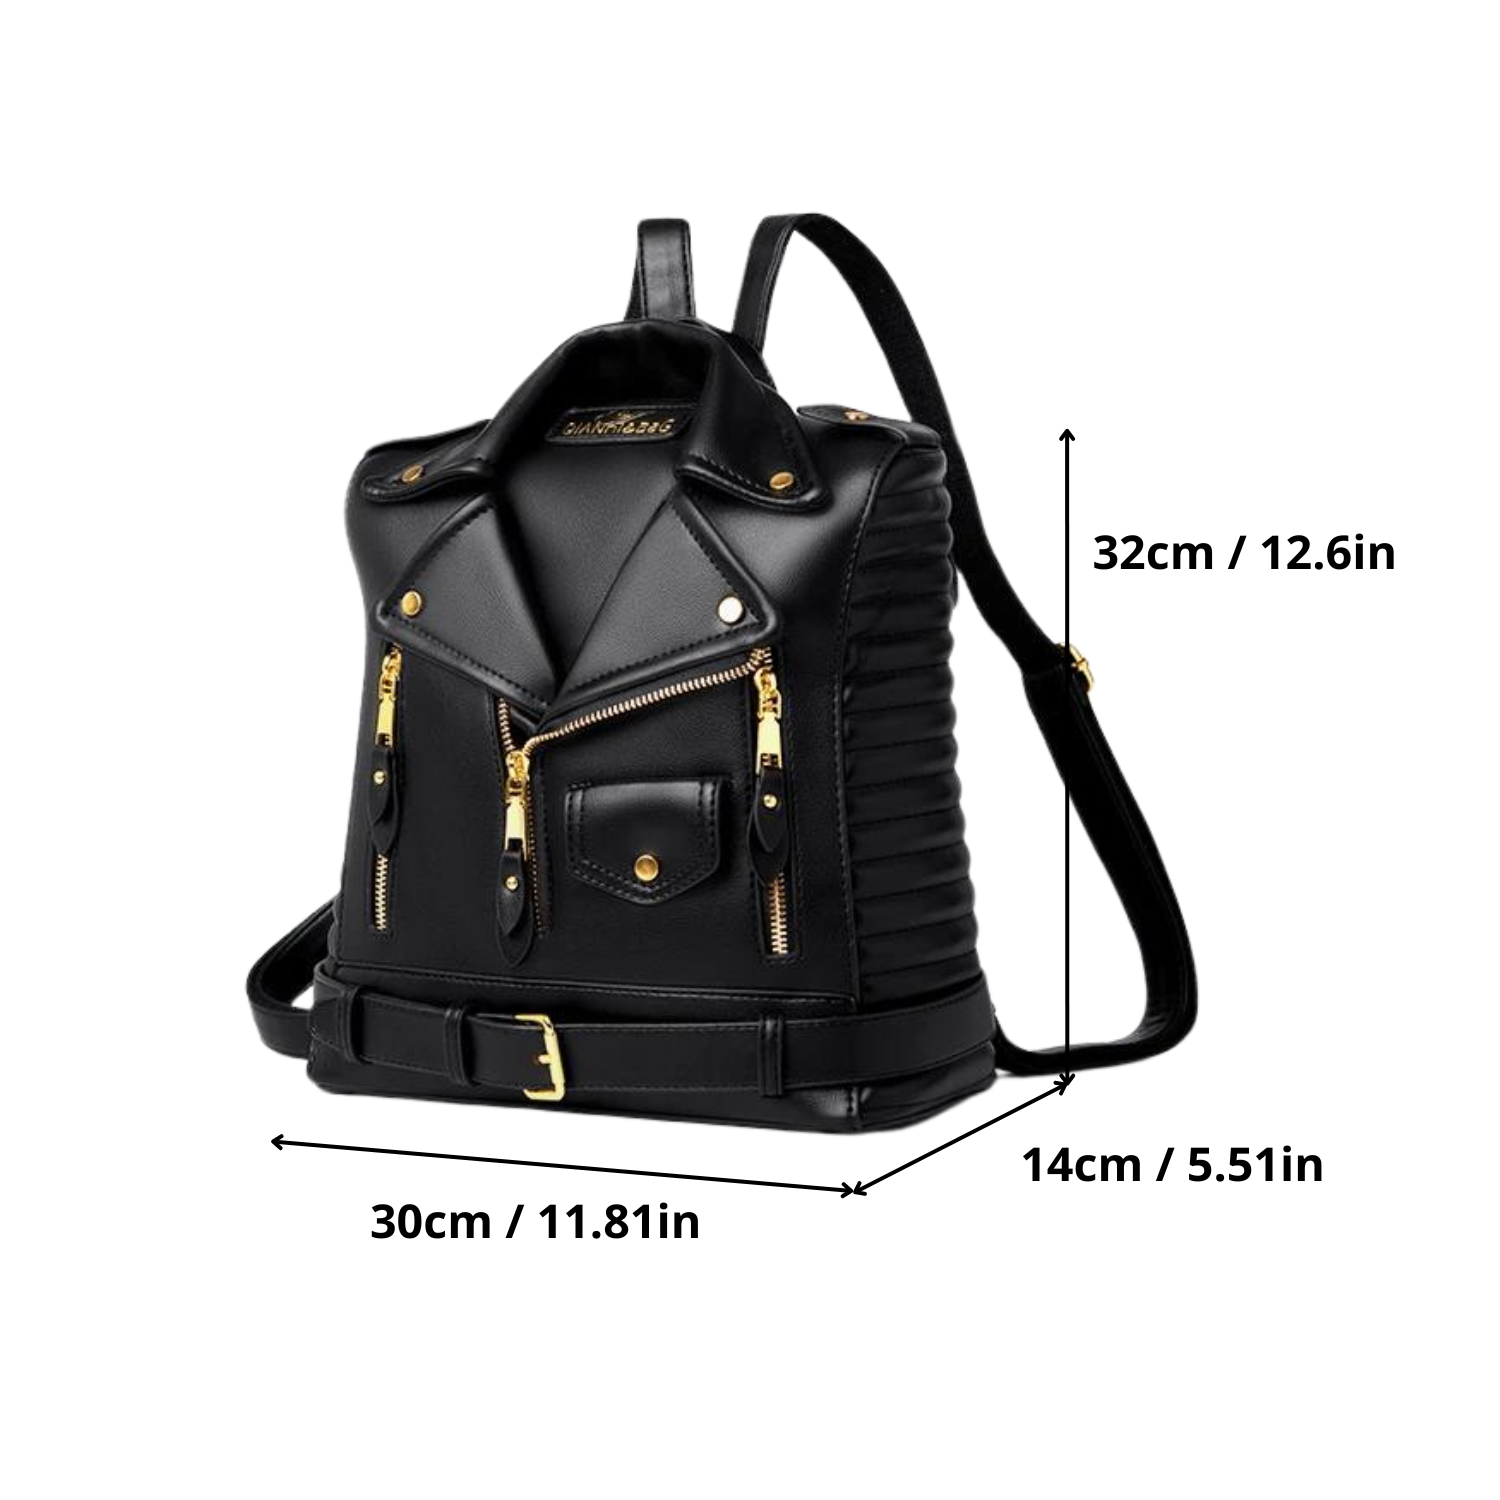 Luxe Designer Leather Backpack - Edgy Urban Chic